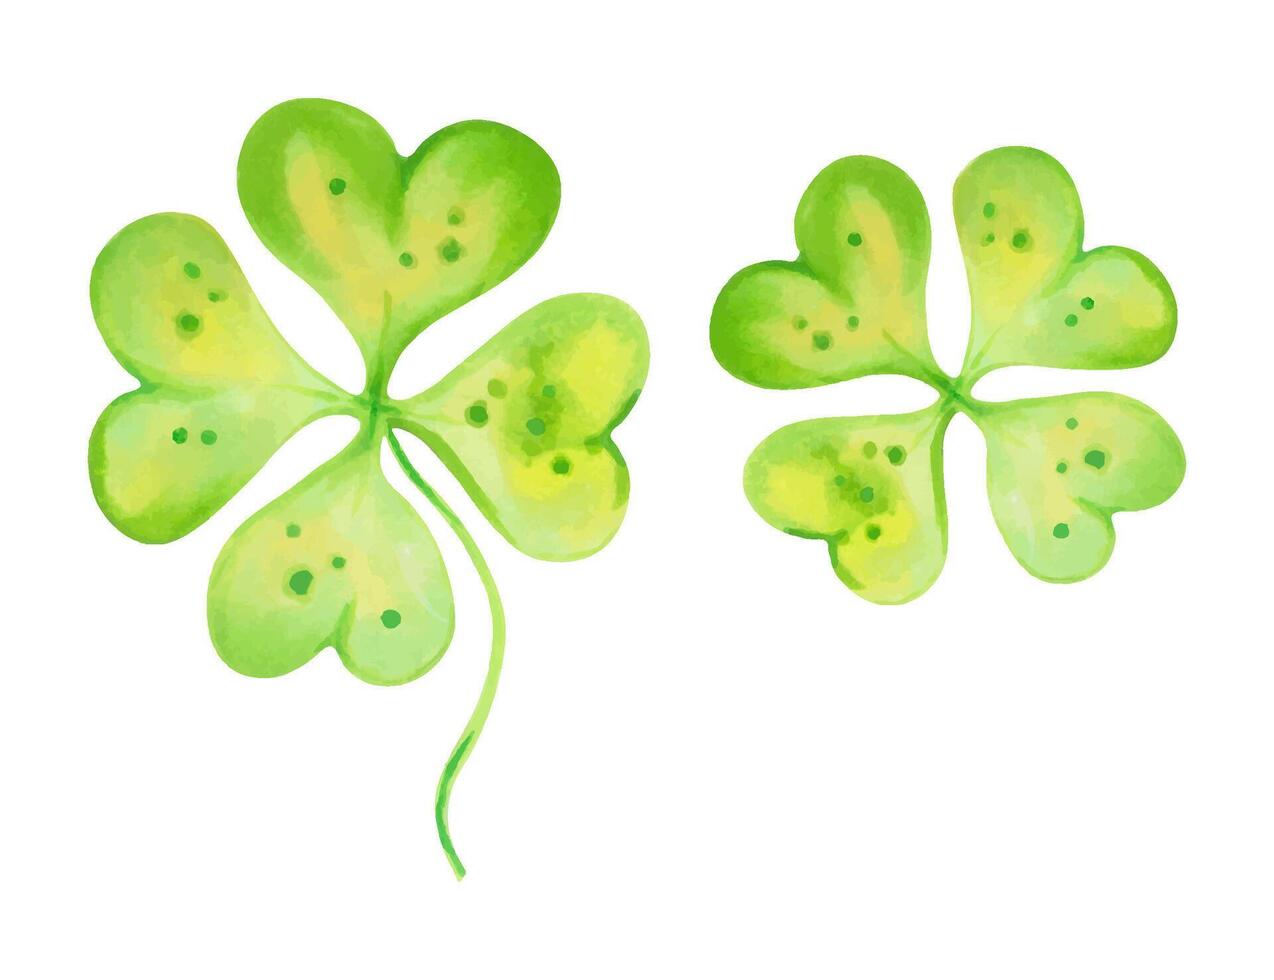 Four leaf yellow green clover for good luck on St. Patrick's Day.Illustration with watercolors and markers.Hand drawn isolated sketch.Clip art botanical spring holiday picture, plant clover mascot vector